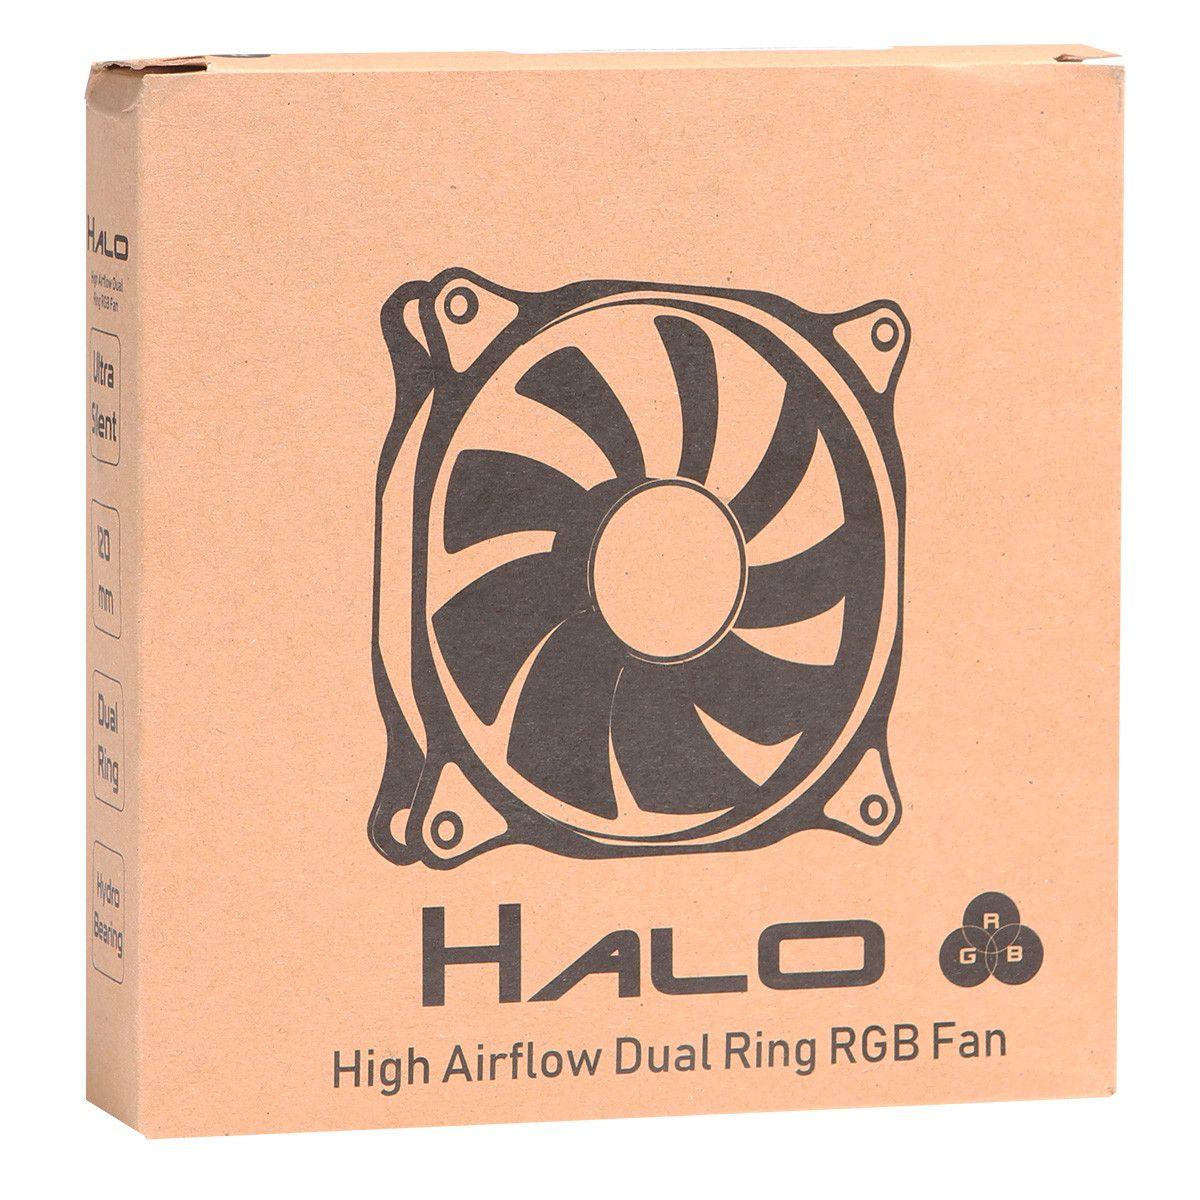 Red Fan Logo - CIT Halo Dual Ring 22 LED 120mm Red Fan 3 Pin | Falcon Computers